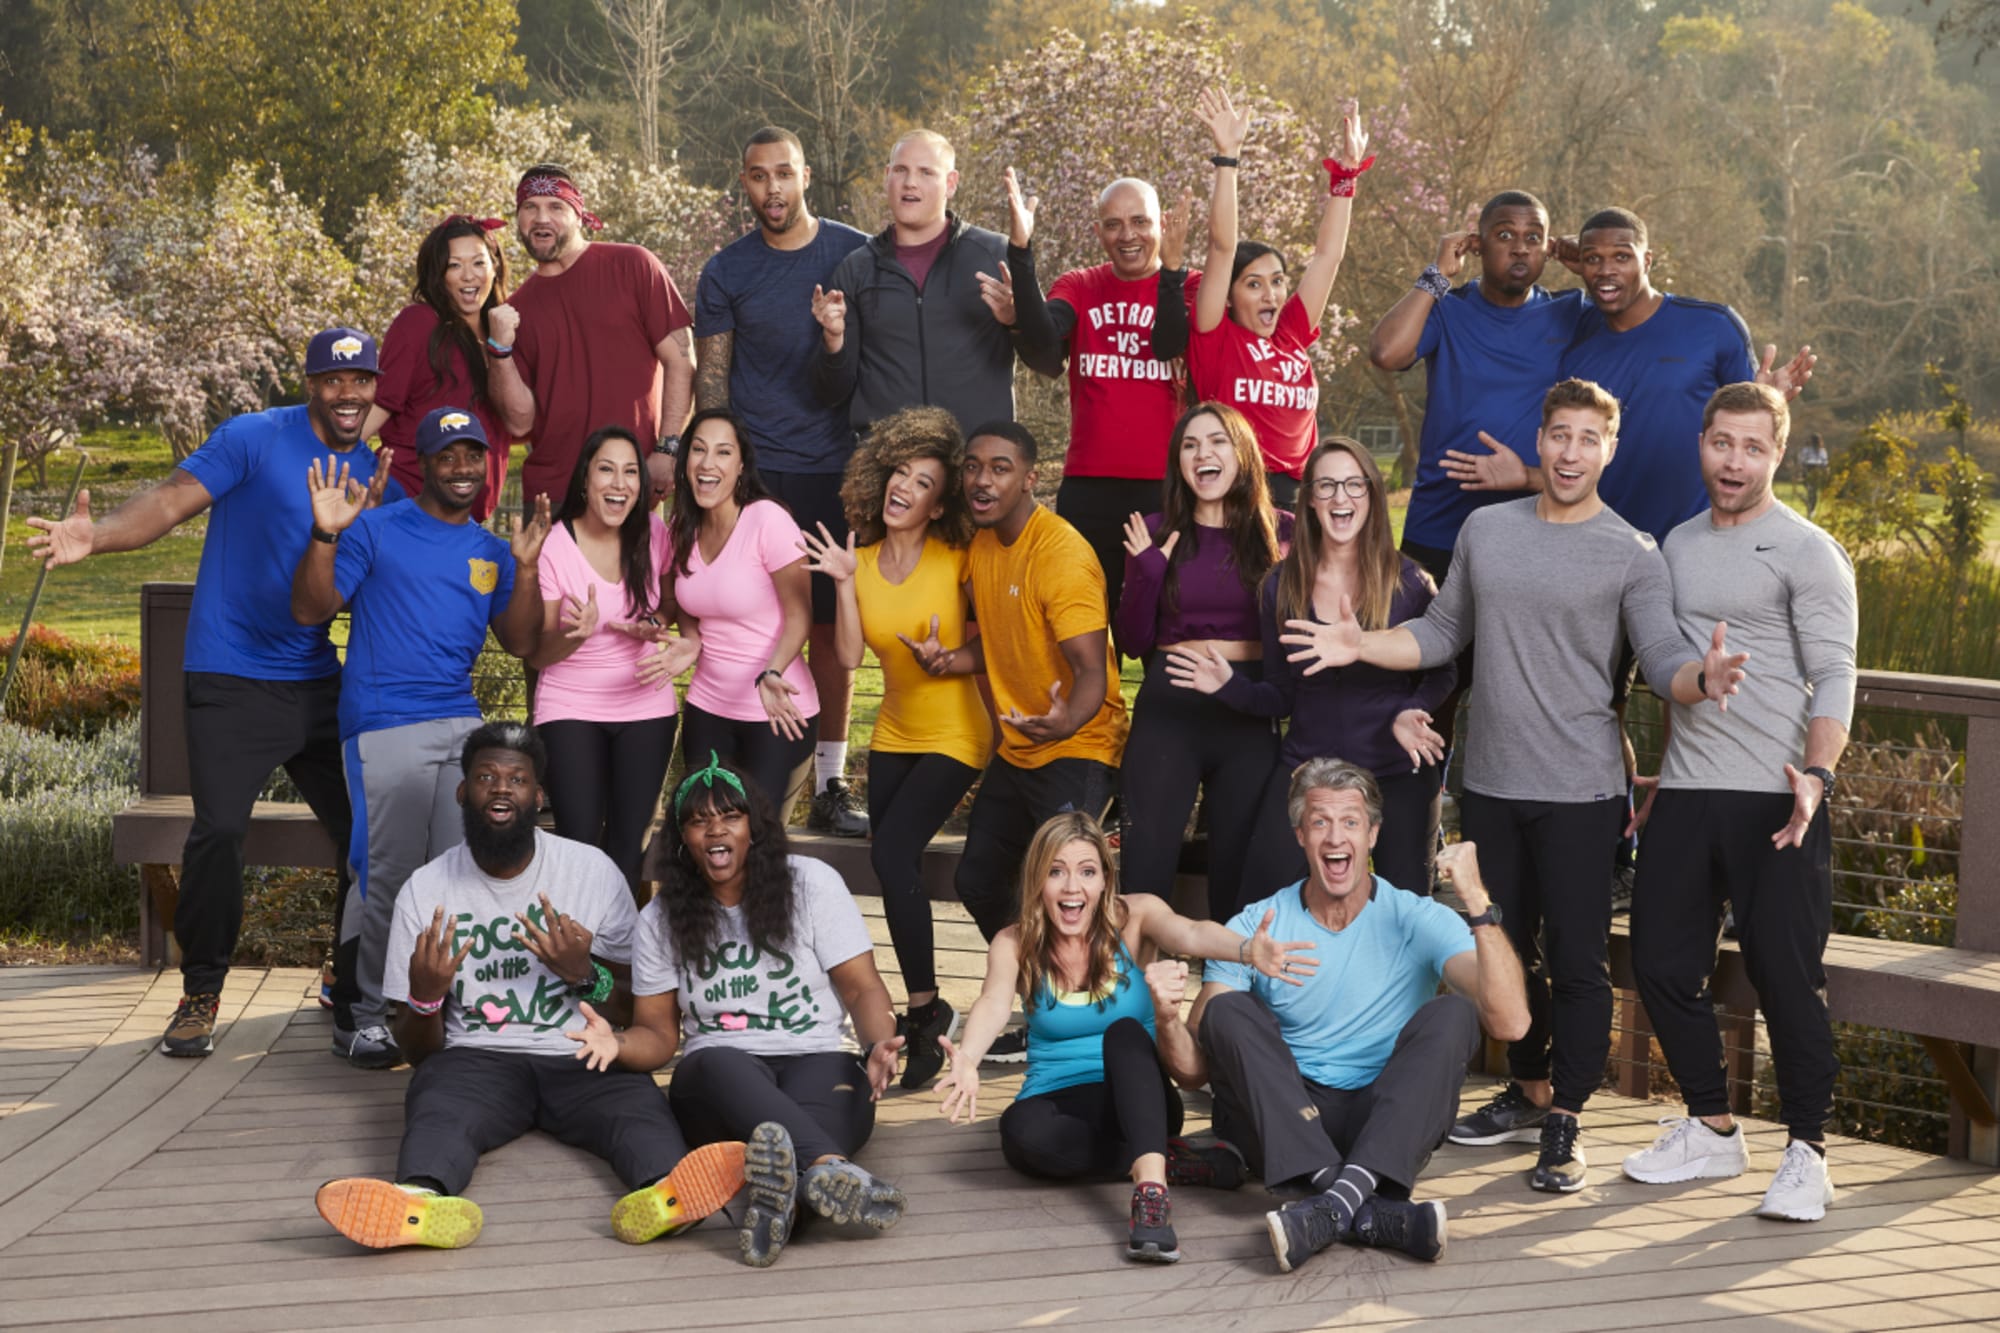 The Amazing Race Season 33 Episode 11 Release Date and Time, Countdown, When Is It Coming Out?